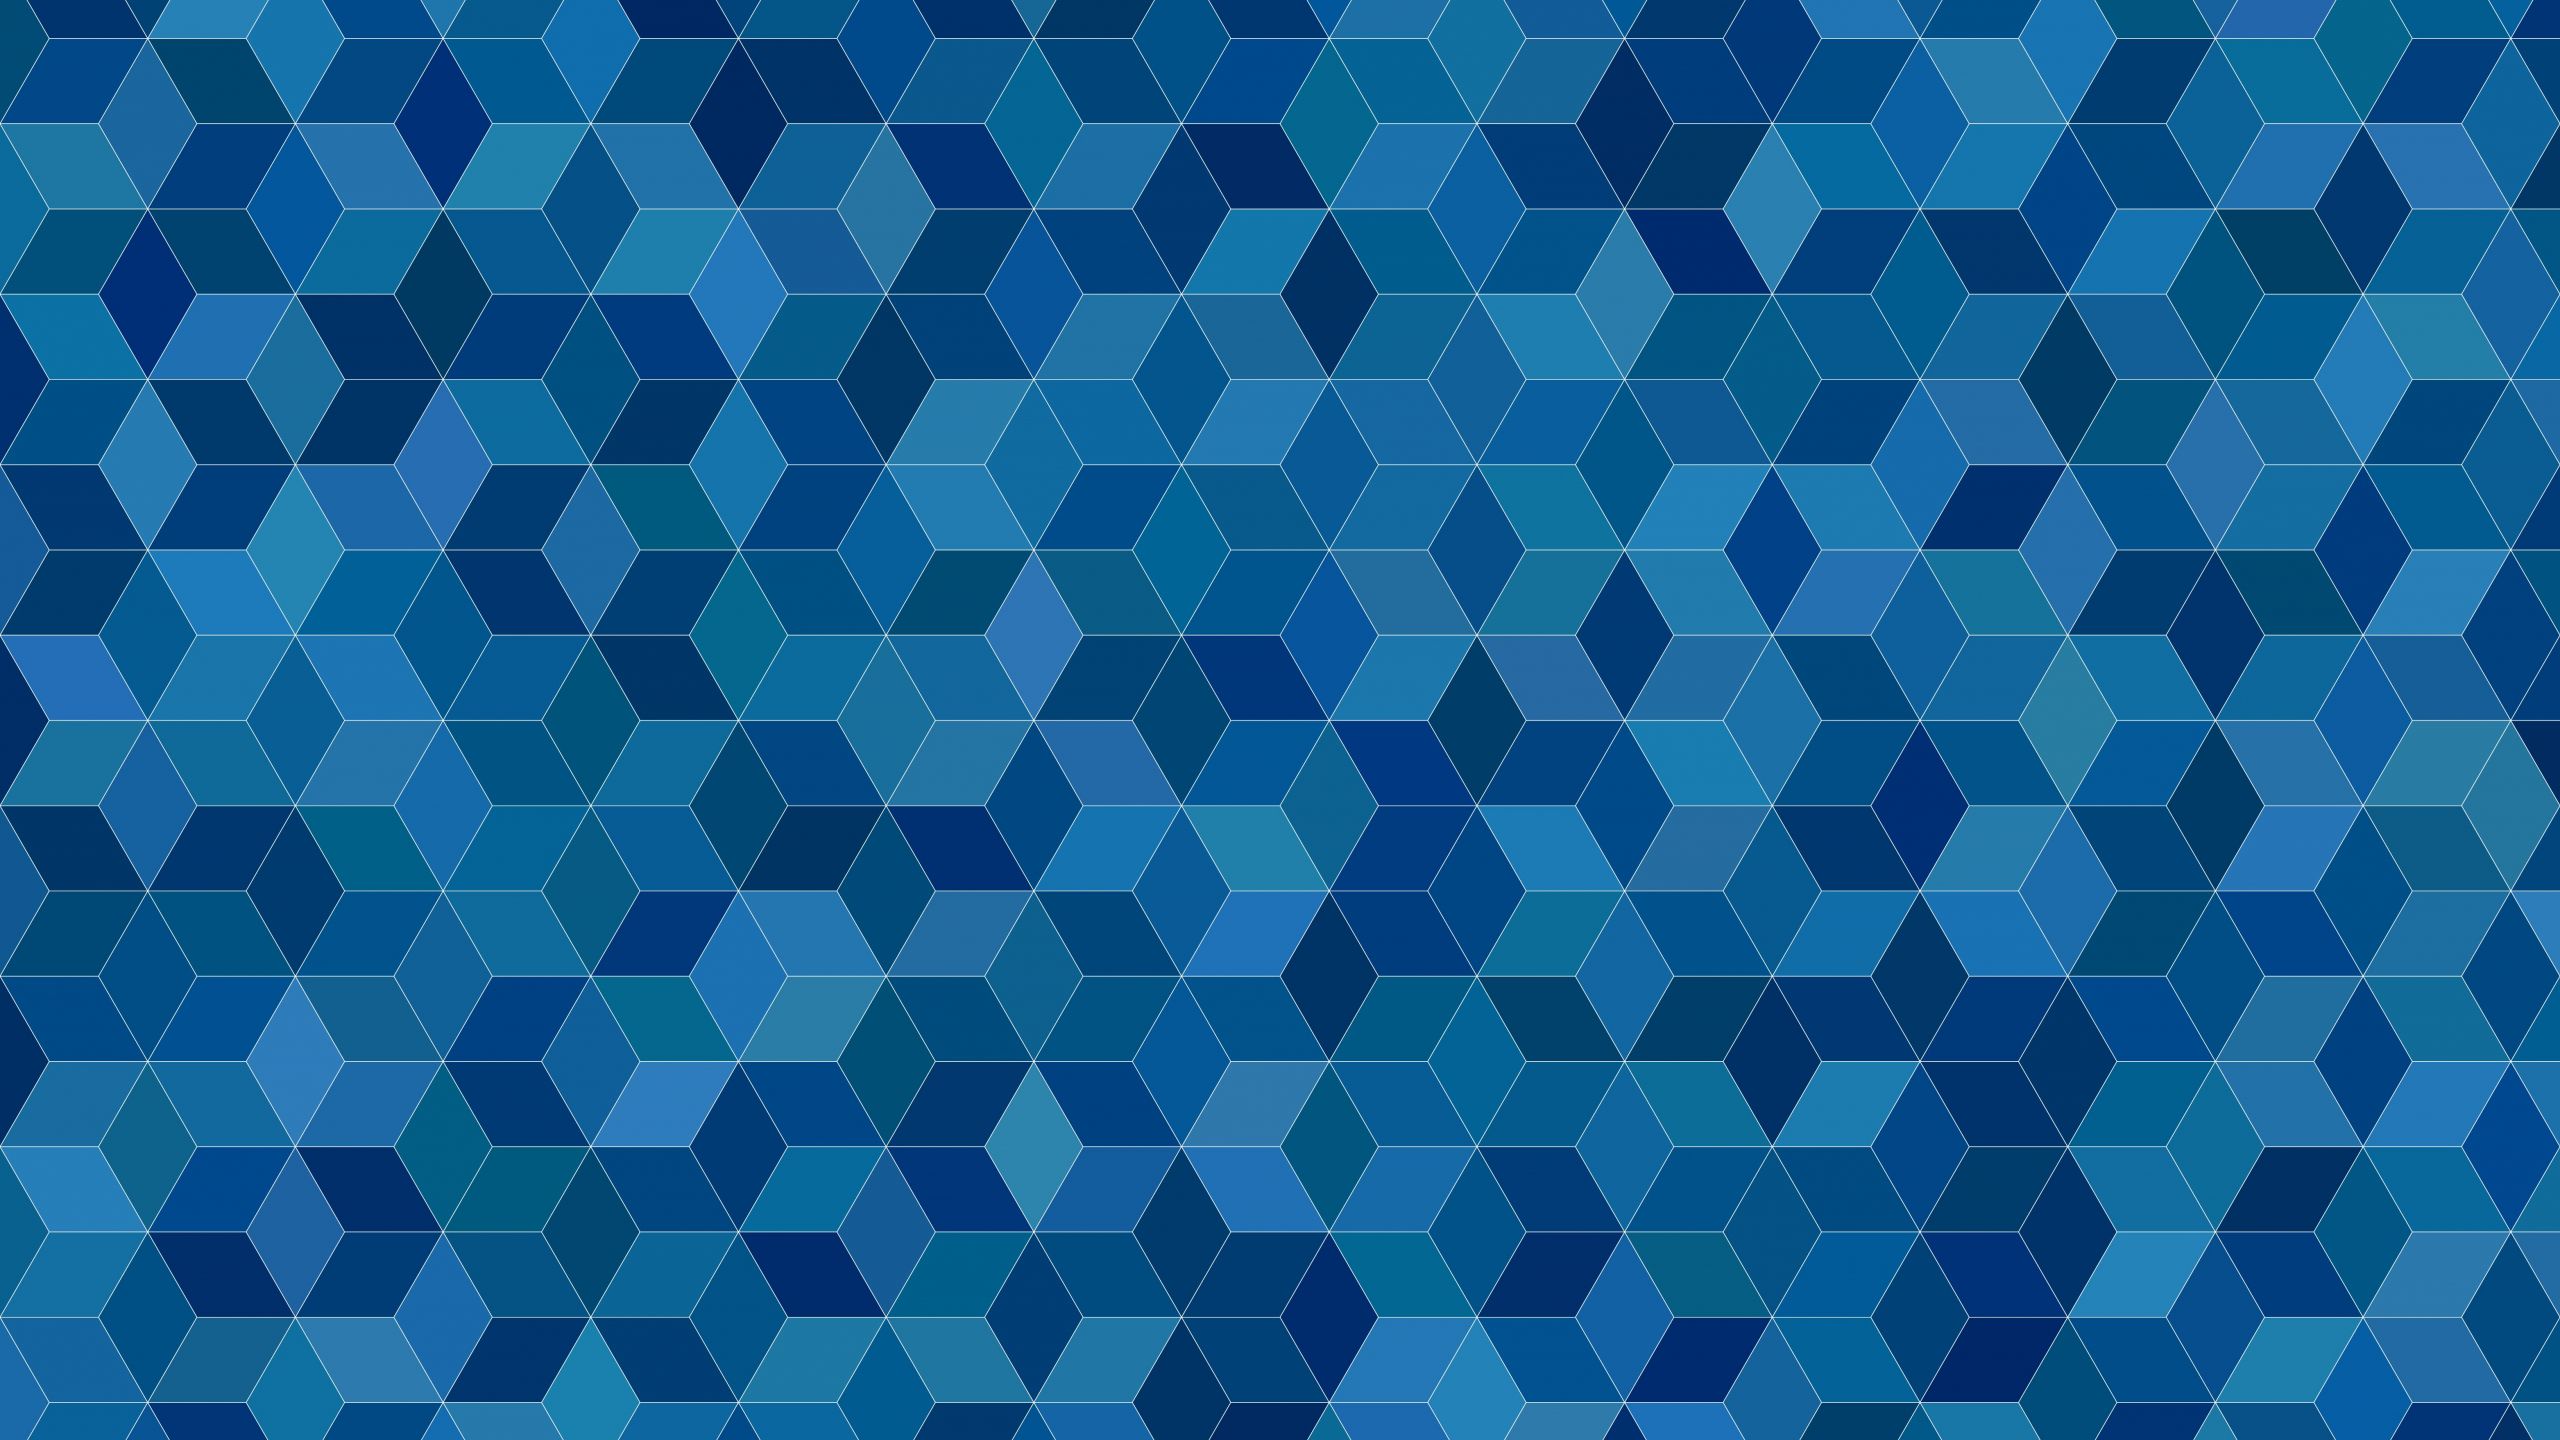 Desktop Wallpaper Blue Cubes, Abstract, Pattern, 4k, 5k, HD Image, Picture, Background, 4146a7